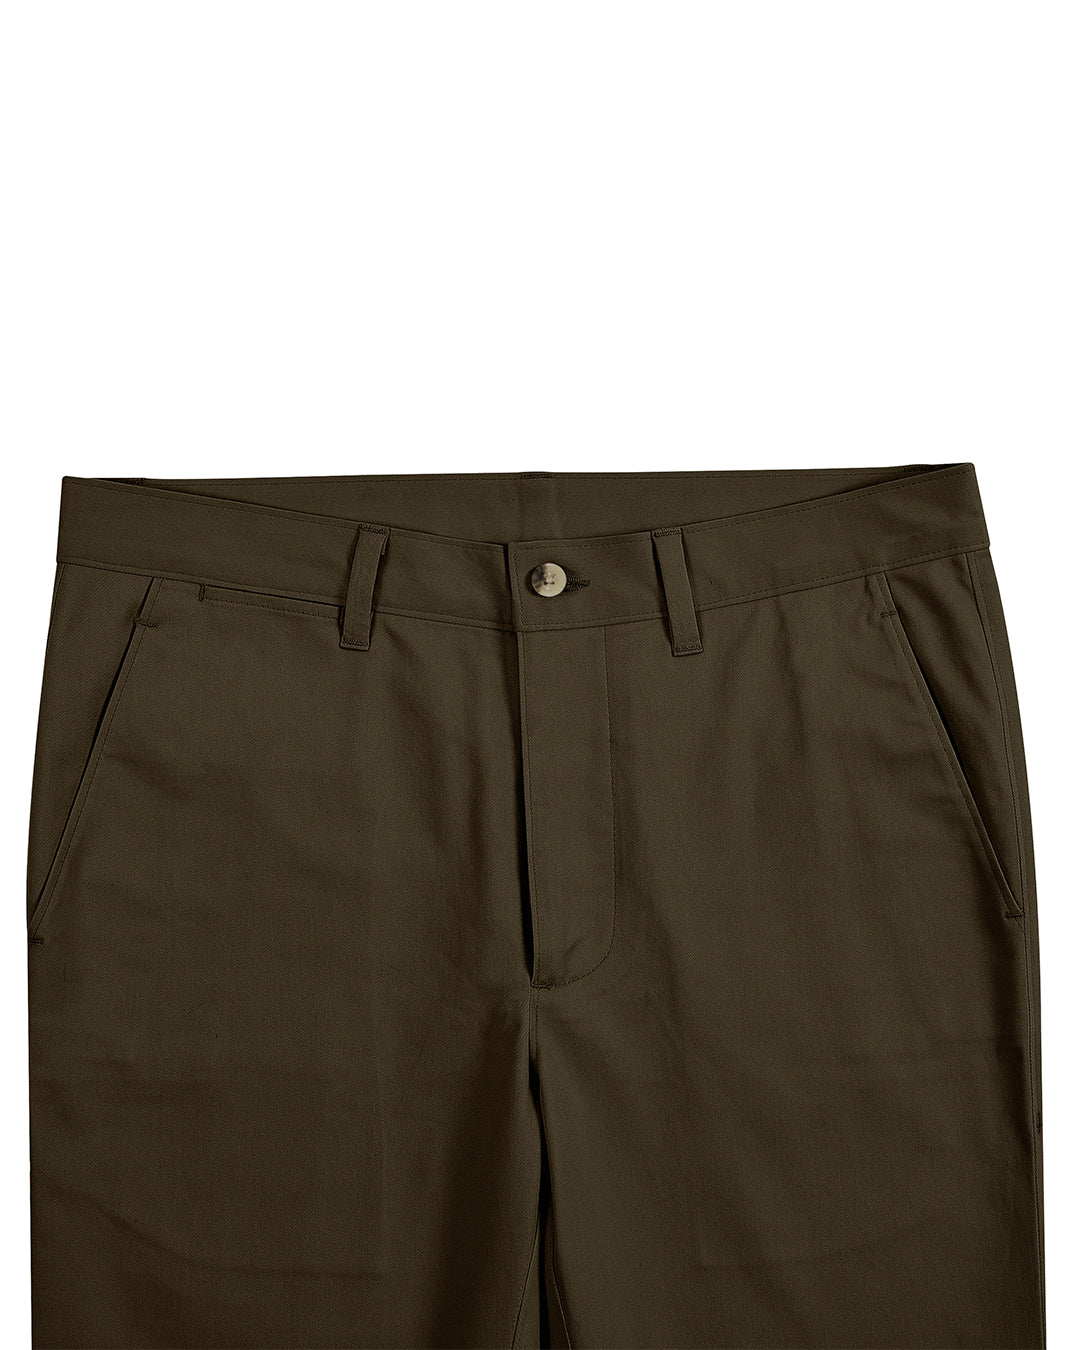 Front view of custom Genoa Chino pants for men by Luxire in choco brown